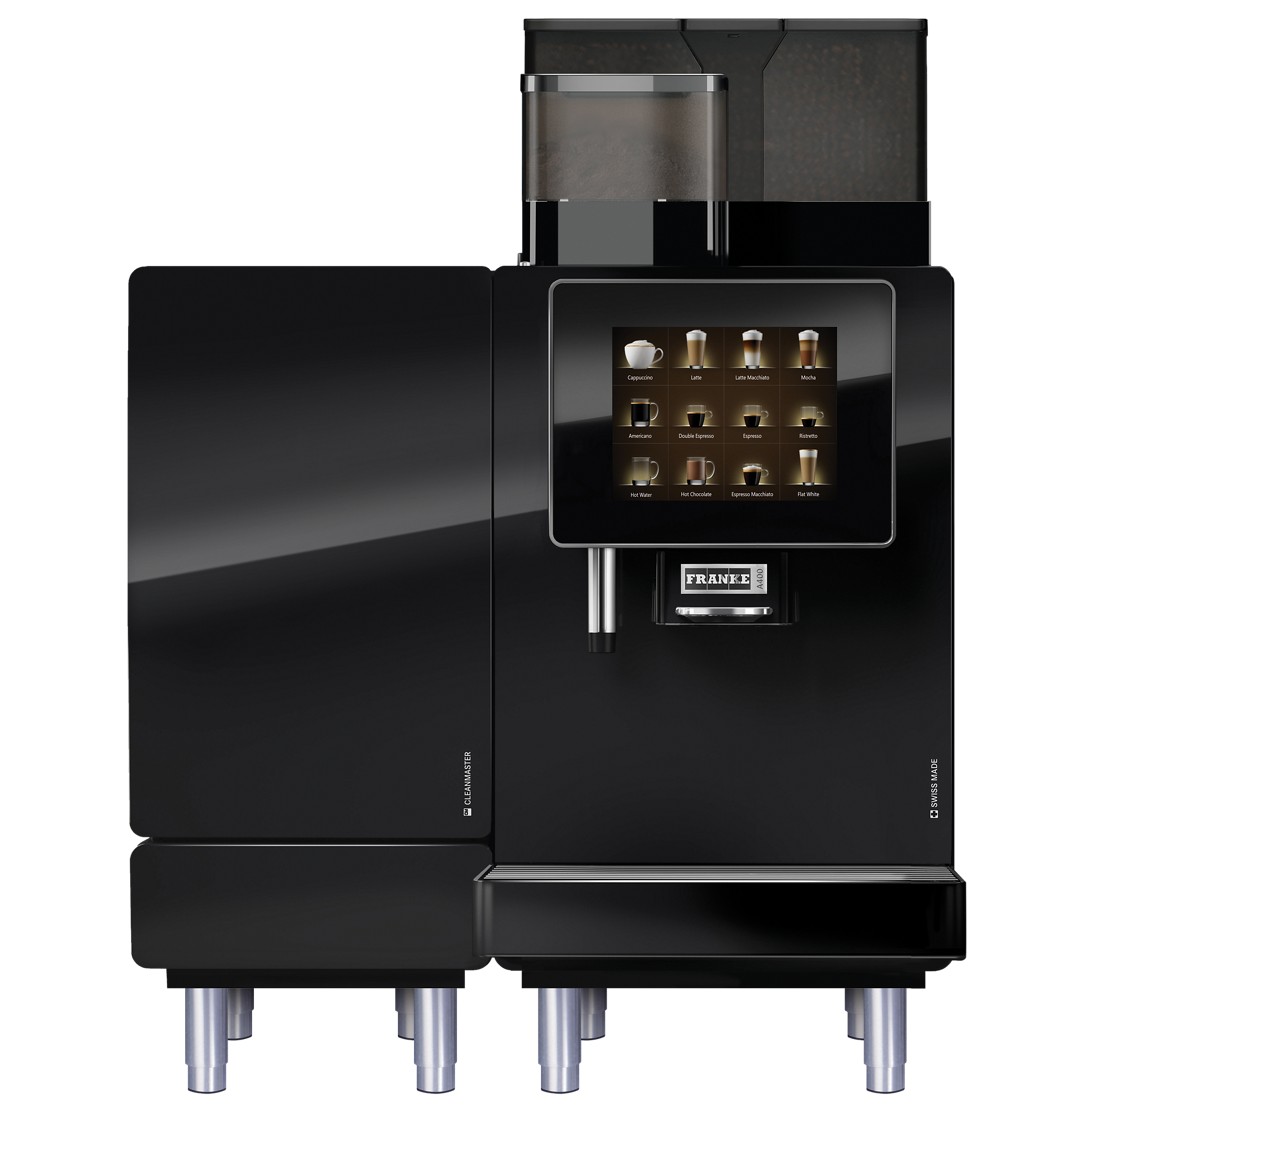 Discover modular coffee solutions with our machine finder